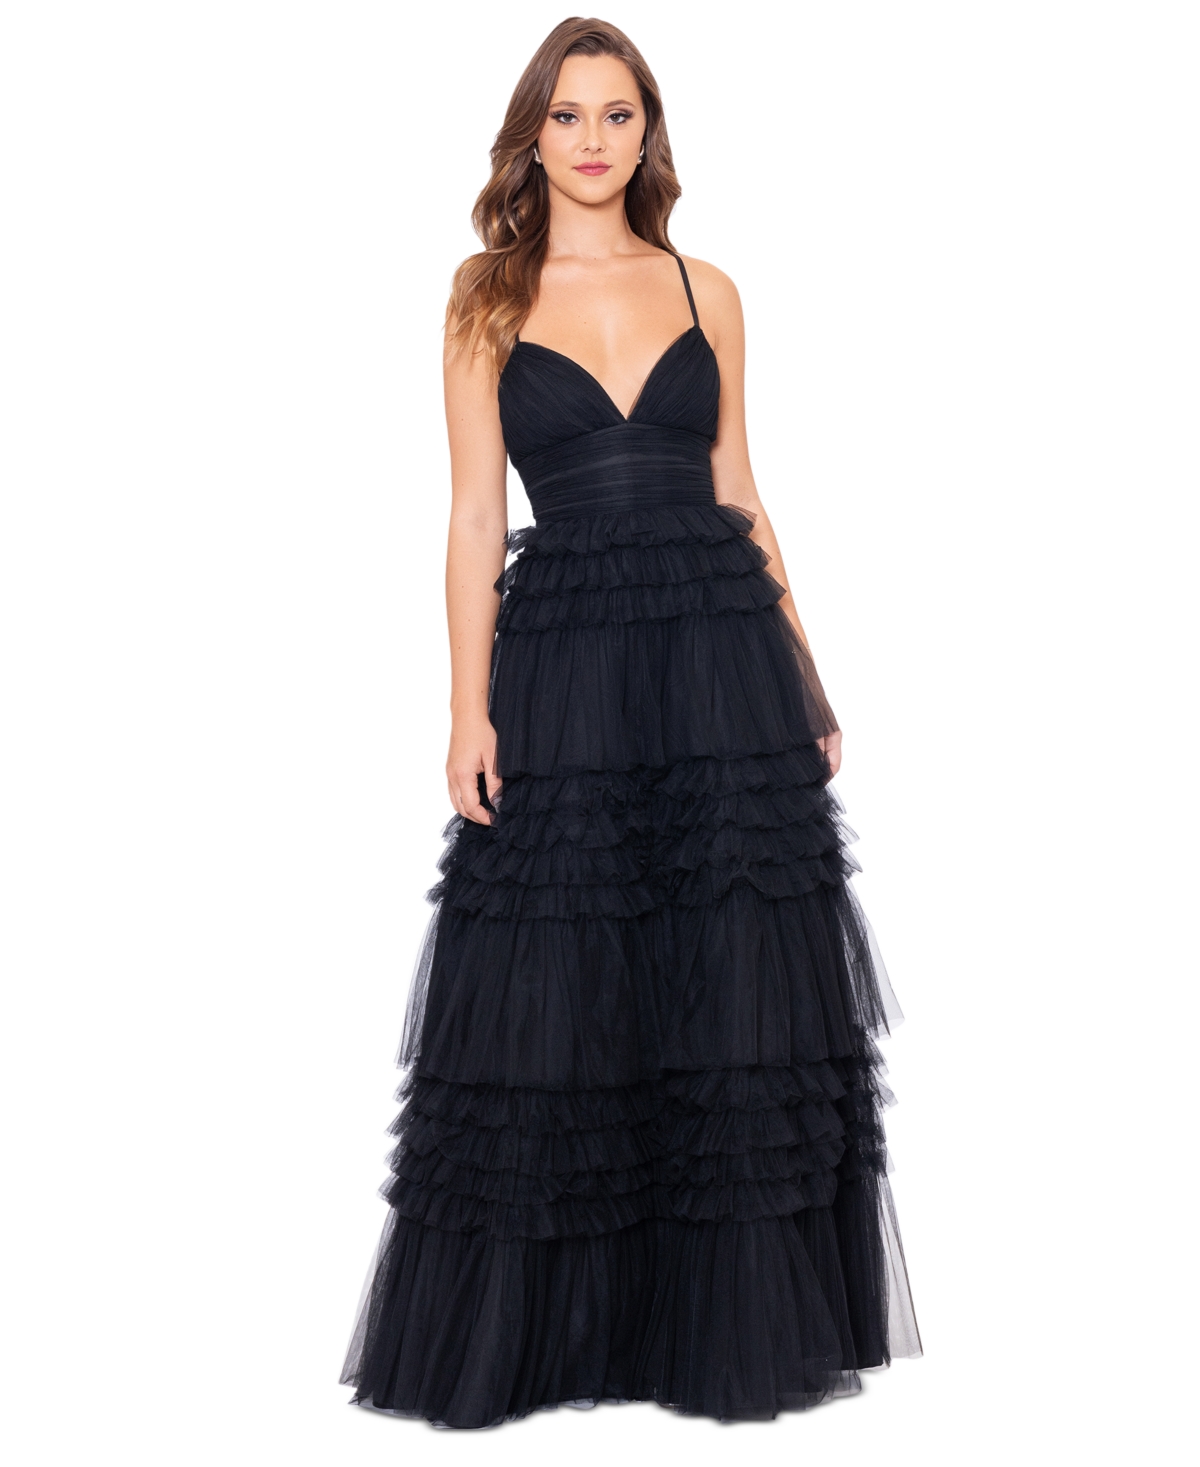 Betsy & Adam Women's V-neck Sleeveless Tiered Ruffle Mesh Gown In Black